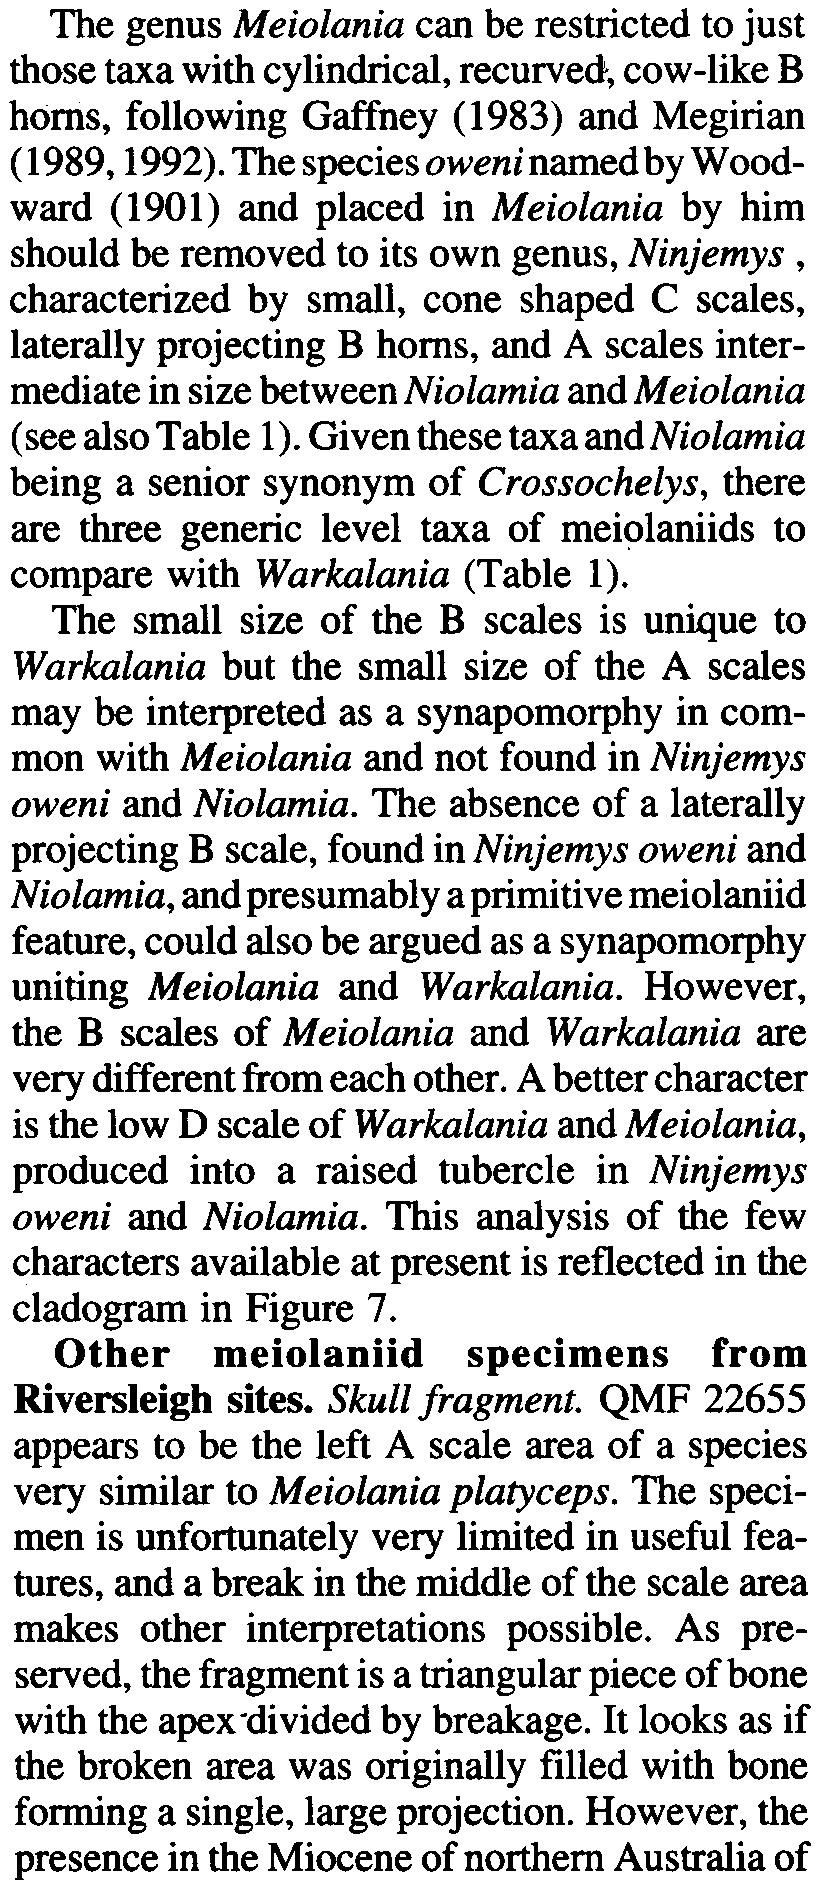 scales intermediate in size between Niolamia and Meiolania (see also Table 1).